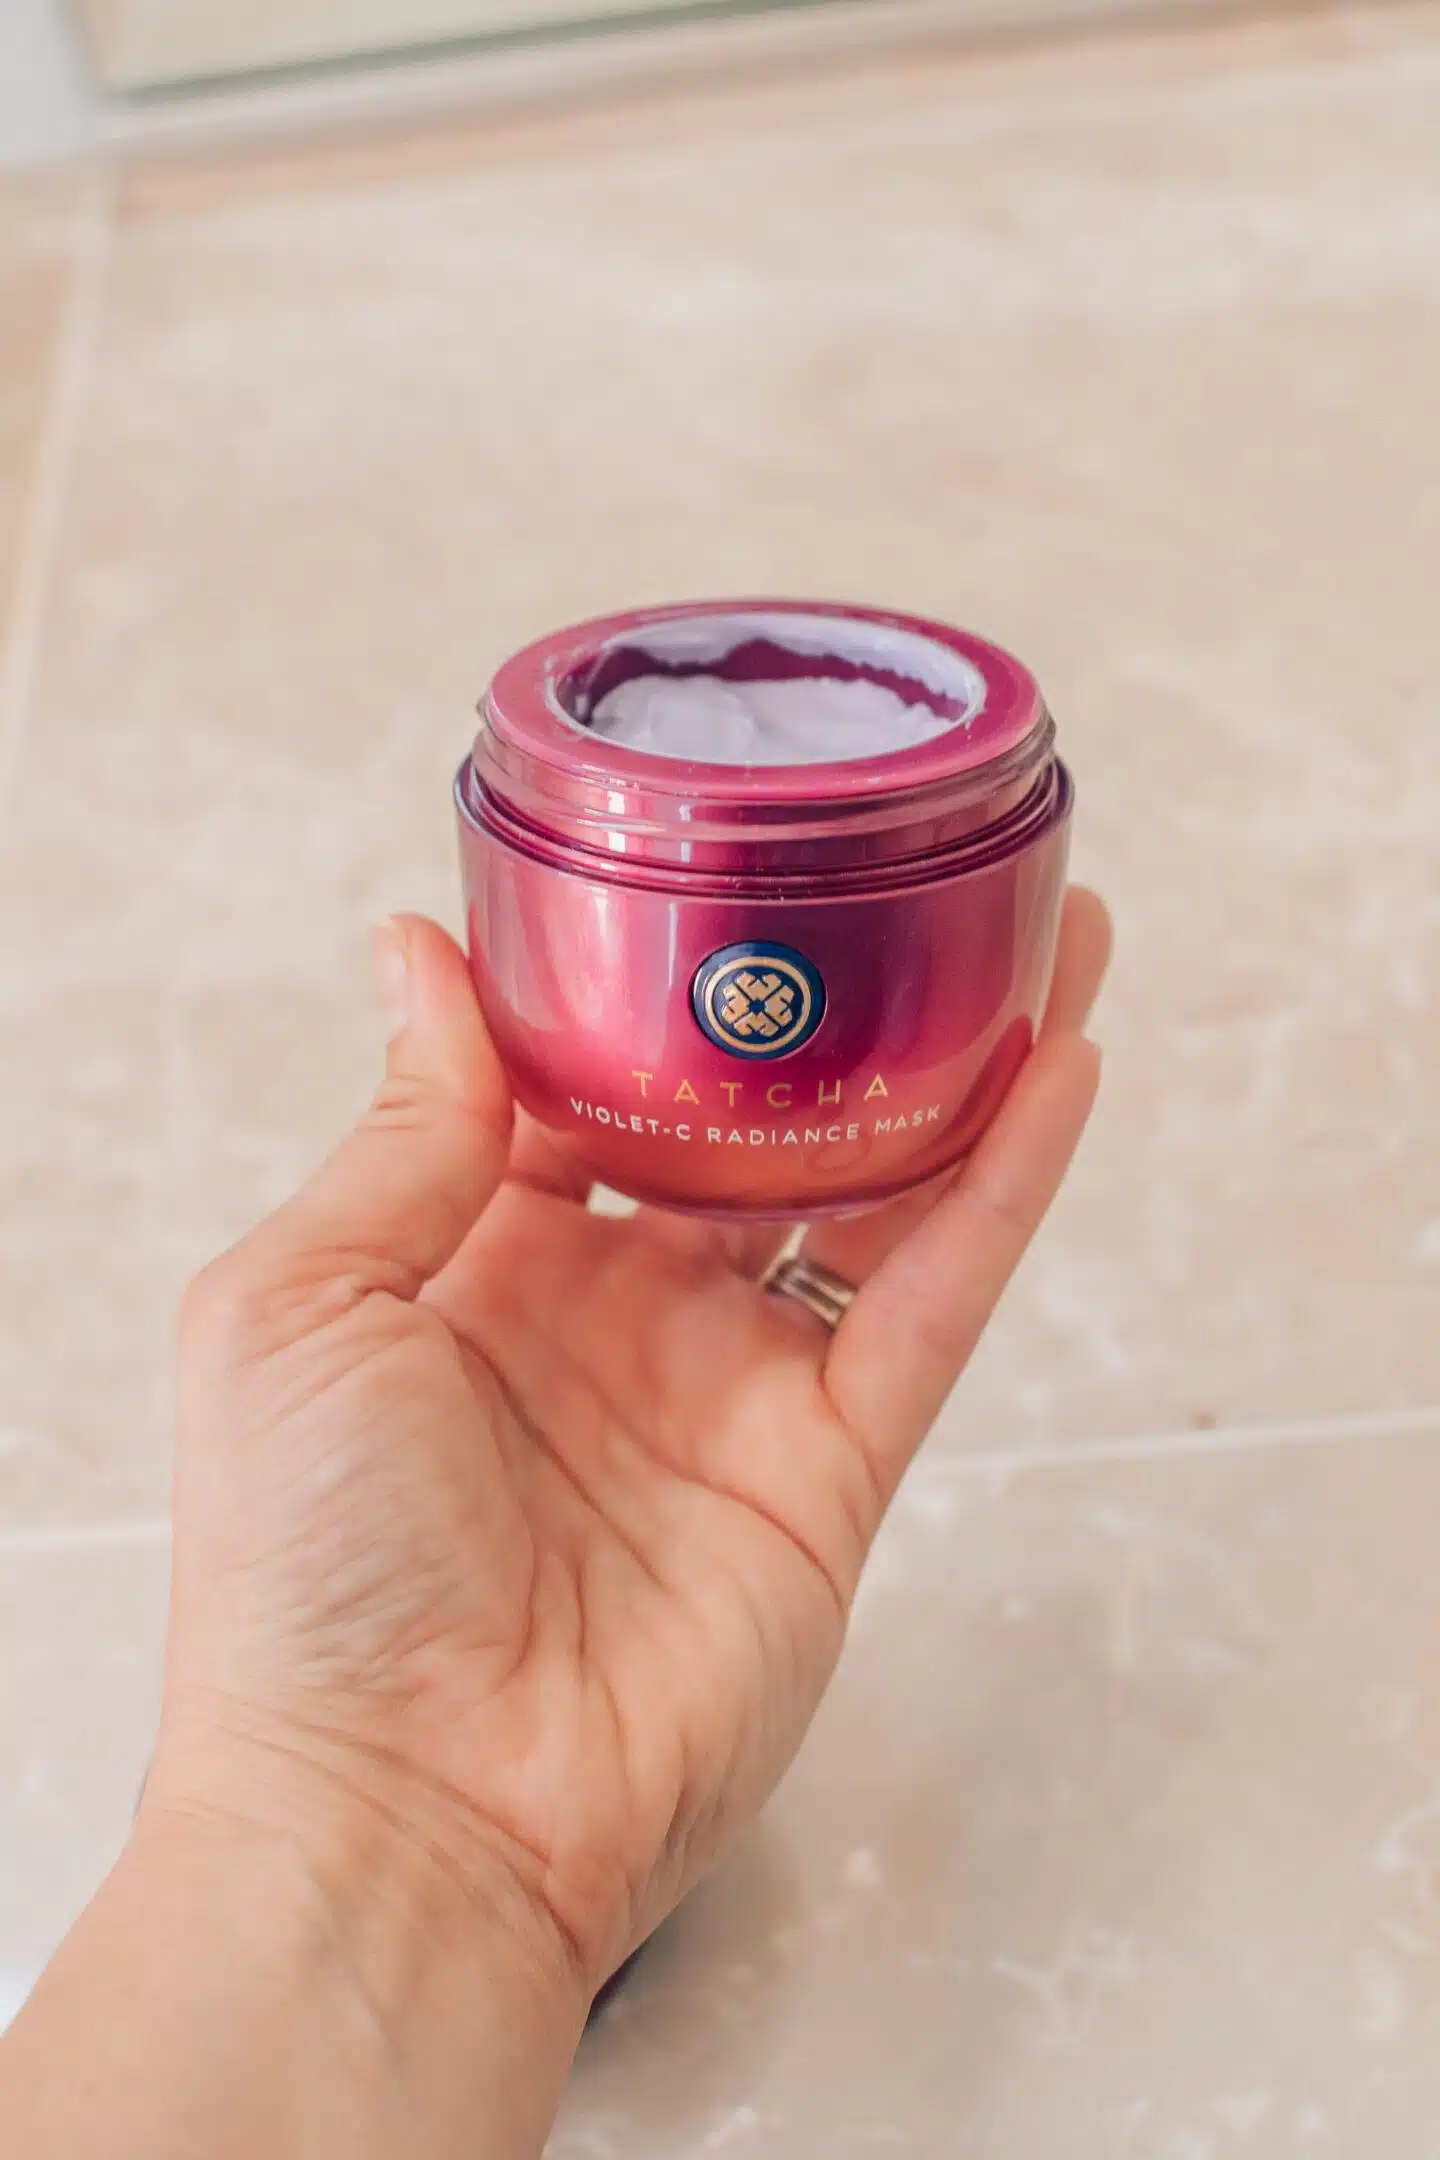 The best Tatcha products you need to add to your skincare routine, by Blogger What The Fab